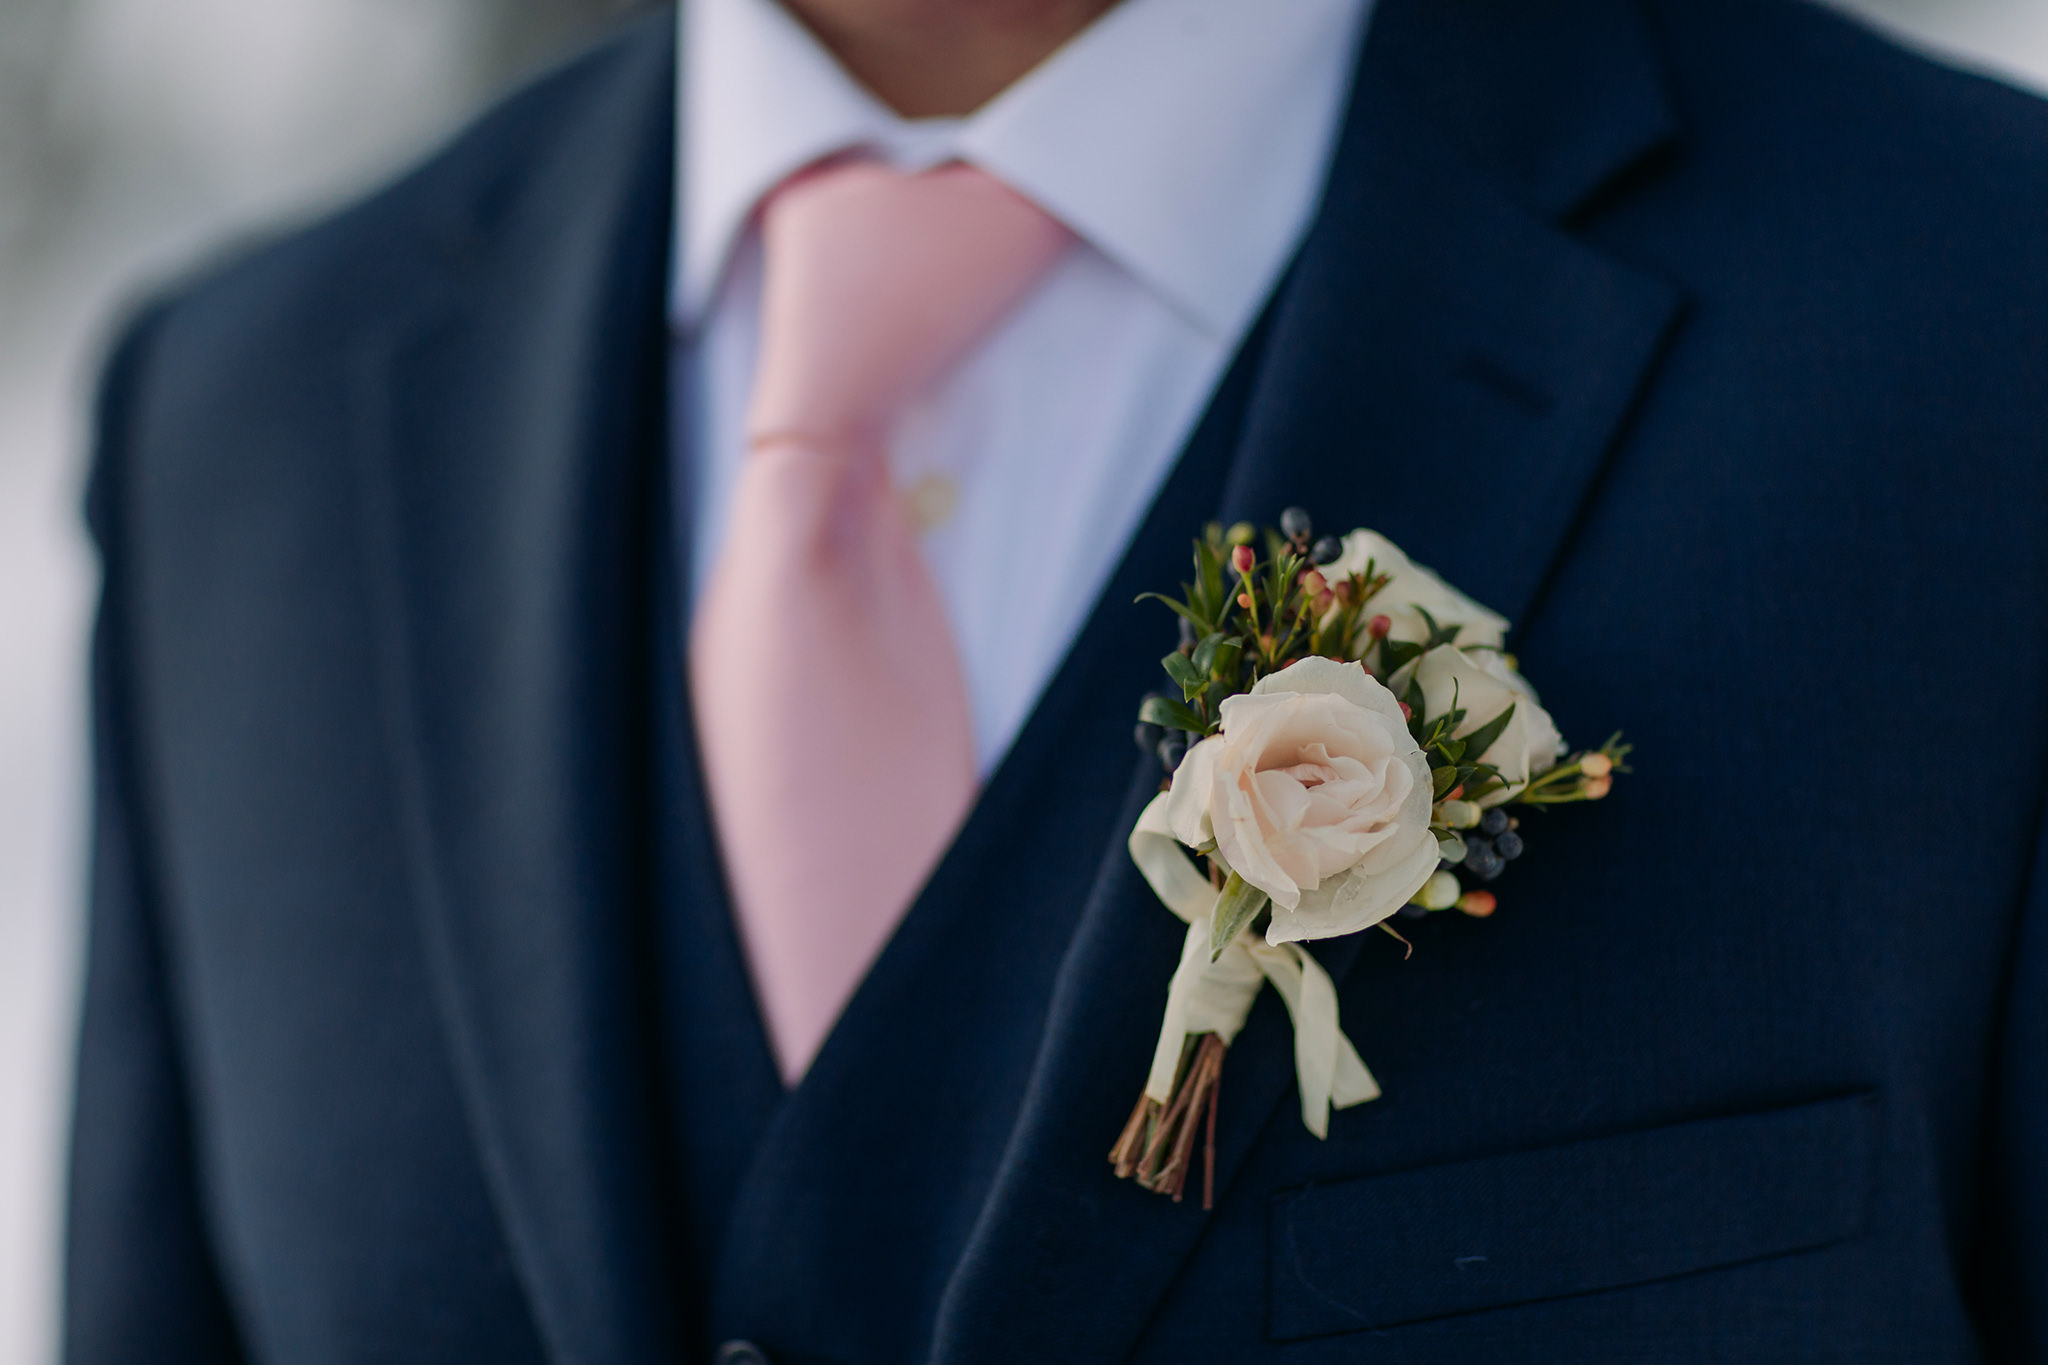 groom in navy suit pink boutonniere winter wedding elopement flowers Photographed by ENV Photography on Bow Valley Parkway